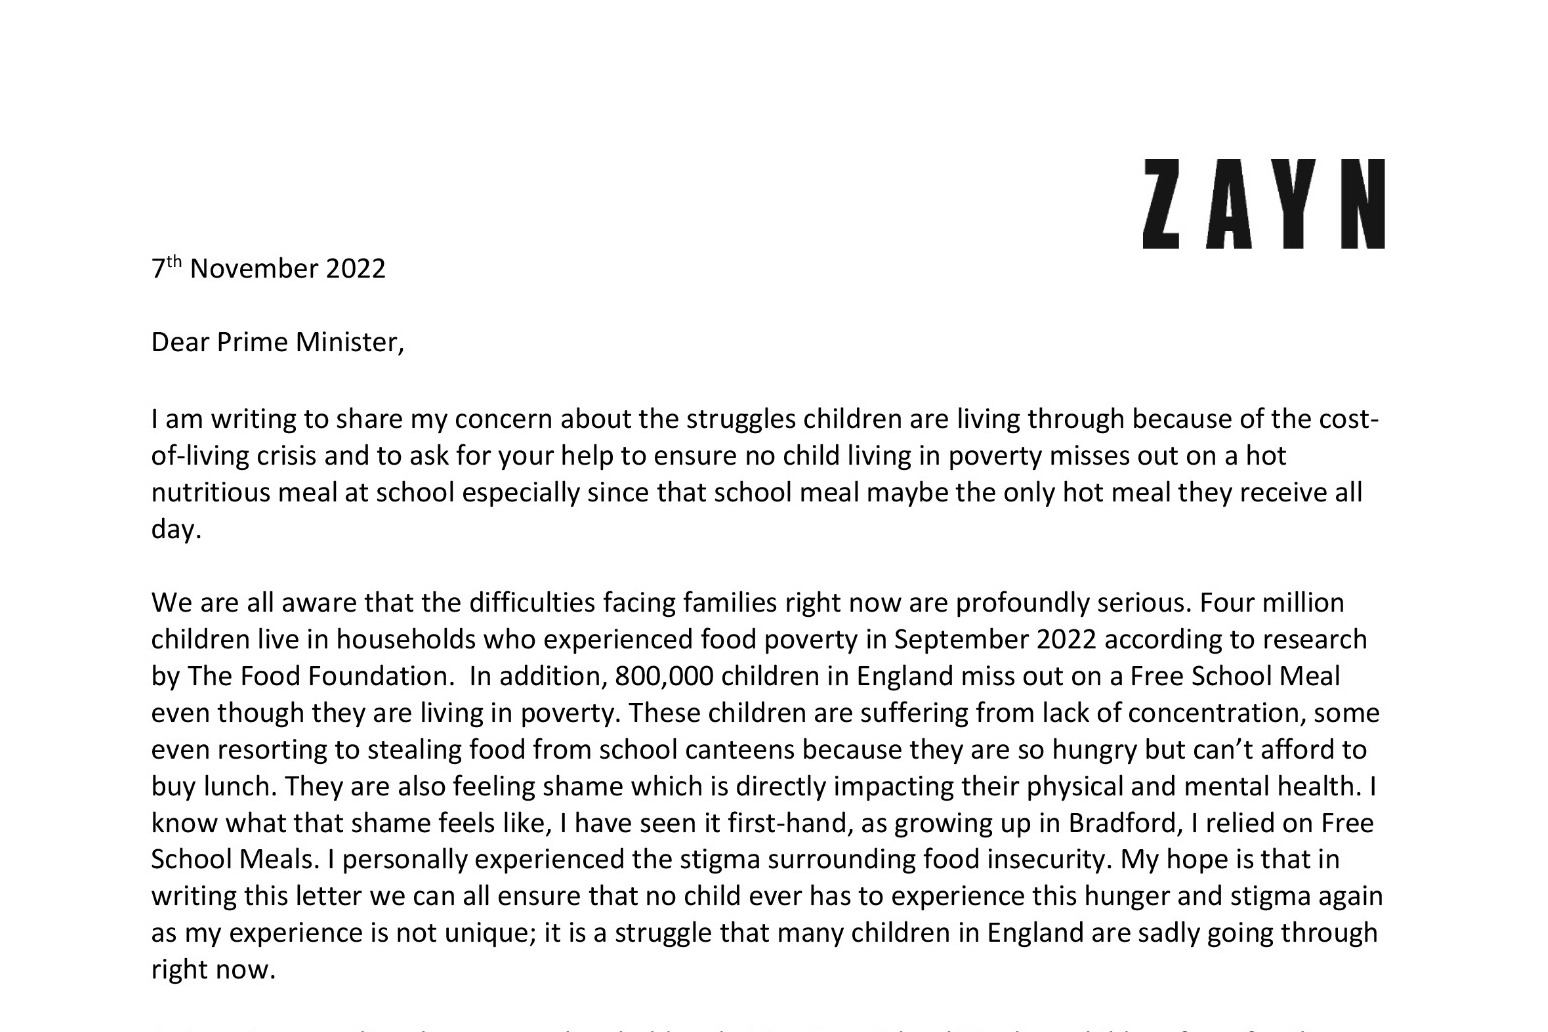 Zayn Malik urges PM to extend free school meals amid cost-of-living crisis 